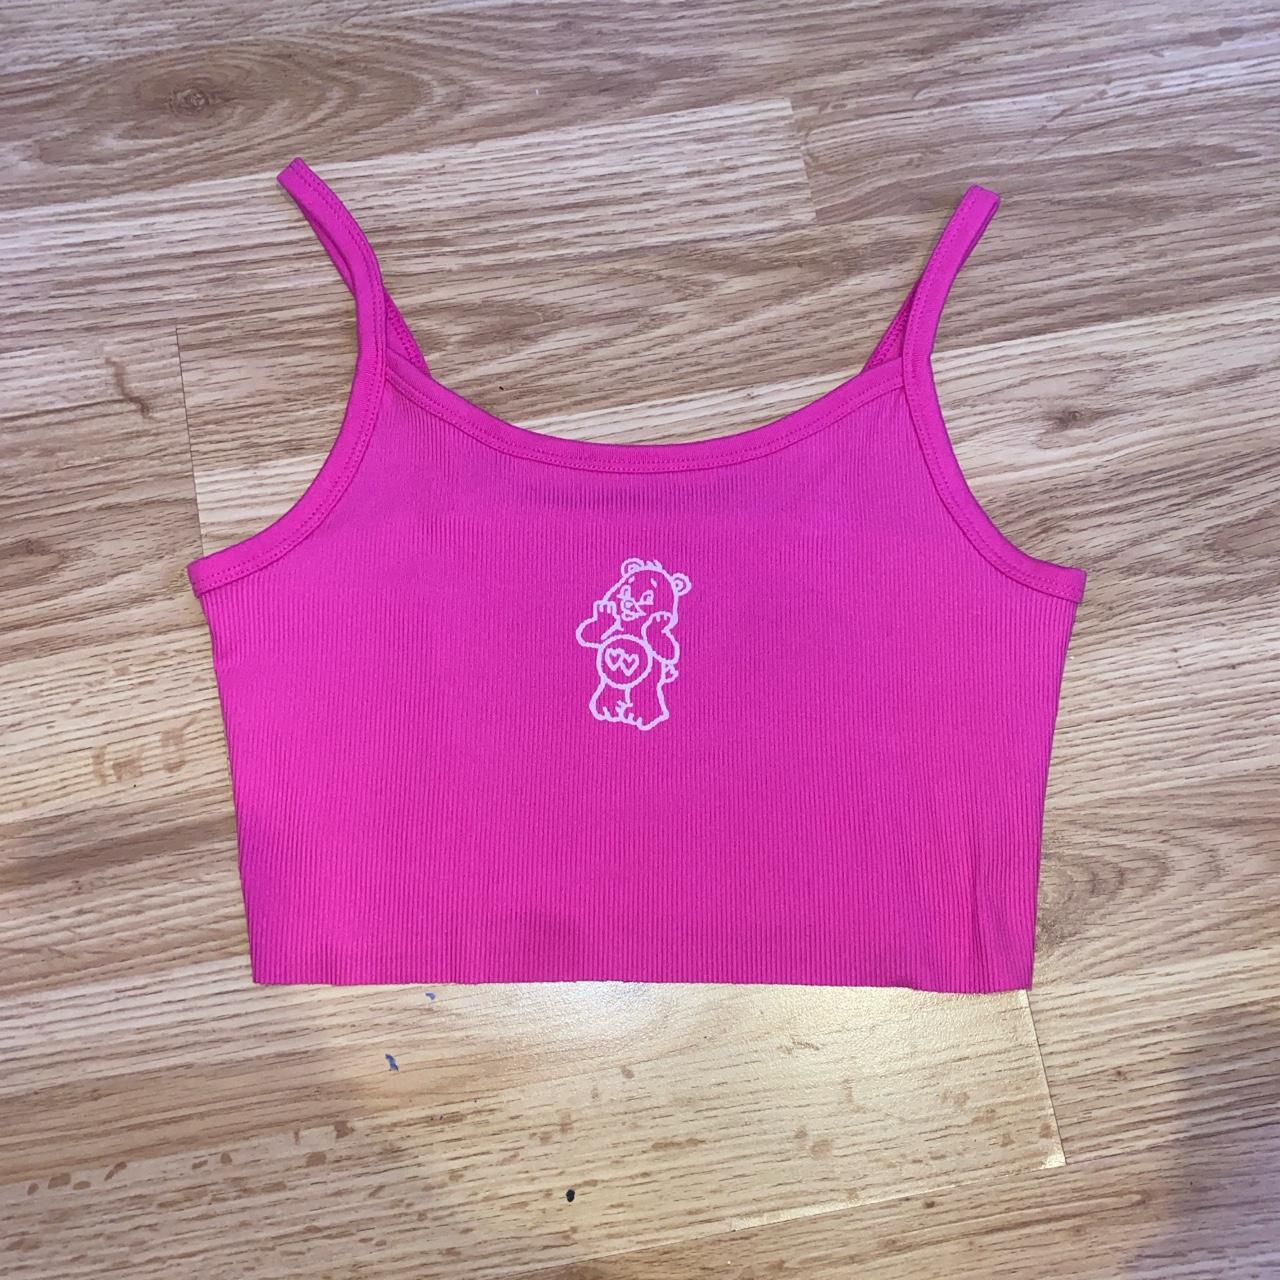 No Boundaries Women's Pink and White Vest